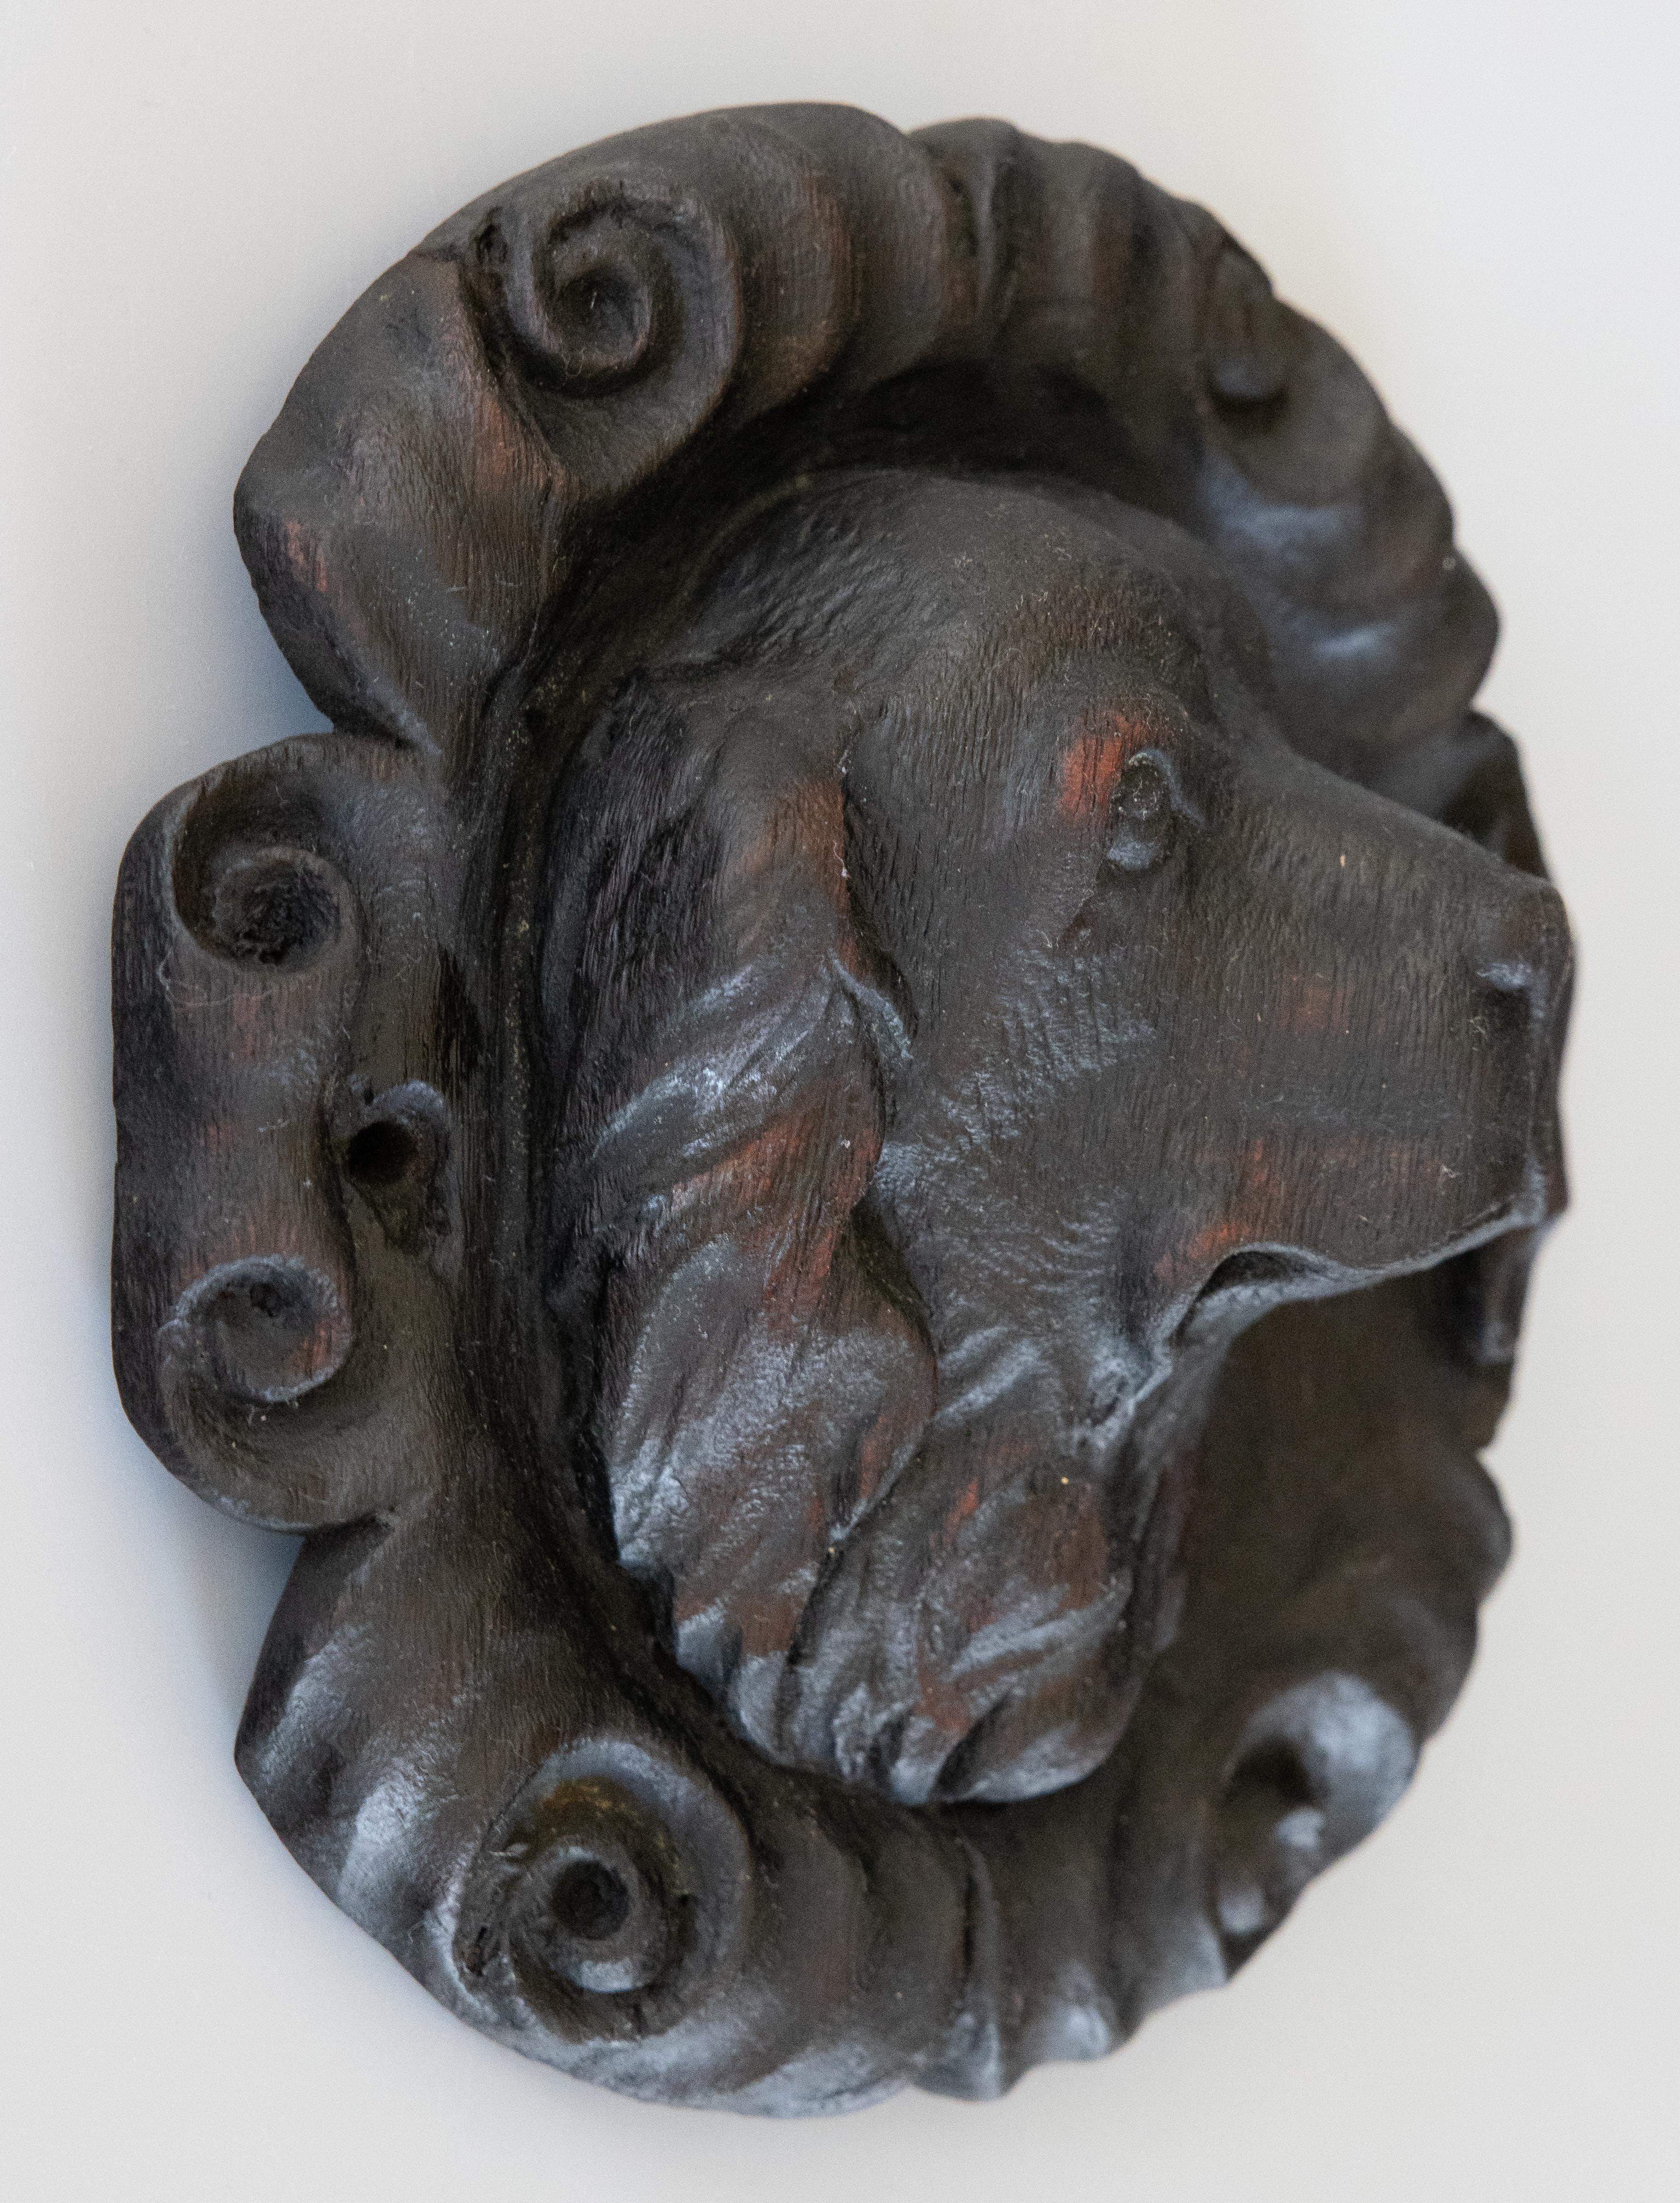 A fine antique 19th-Century black forest Swiss hand carved sporting dog head sculpture plaque. This handsome plaque is finely carved with exceptional details and expression in the spaniel's face which is surrounded by scrollwork. It's perfect for